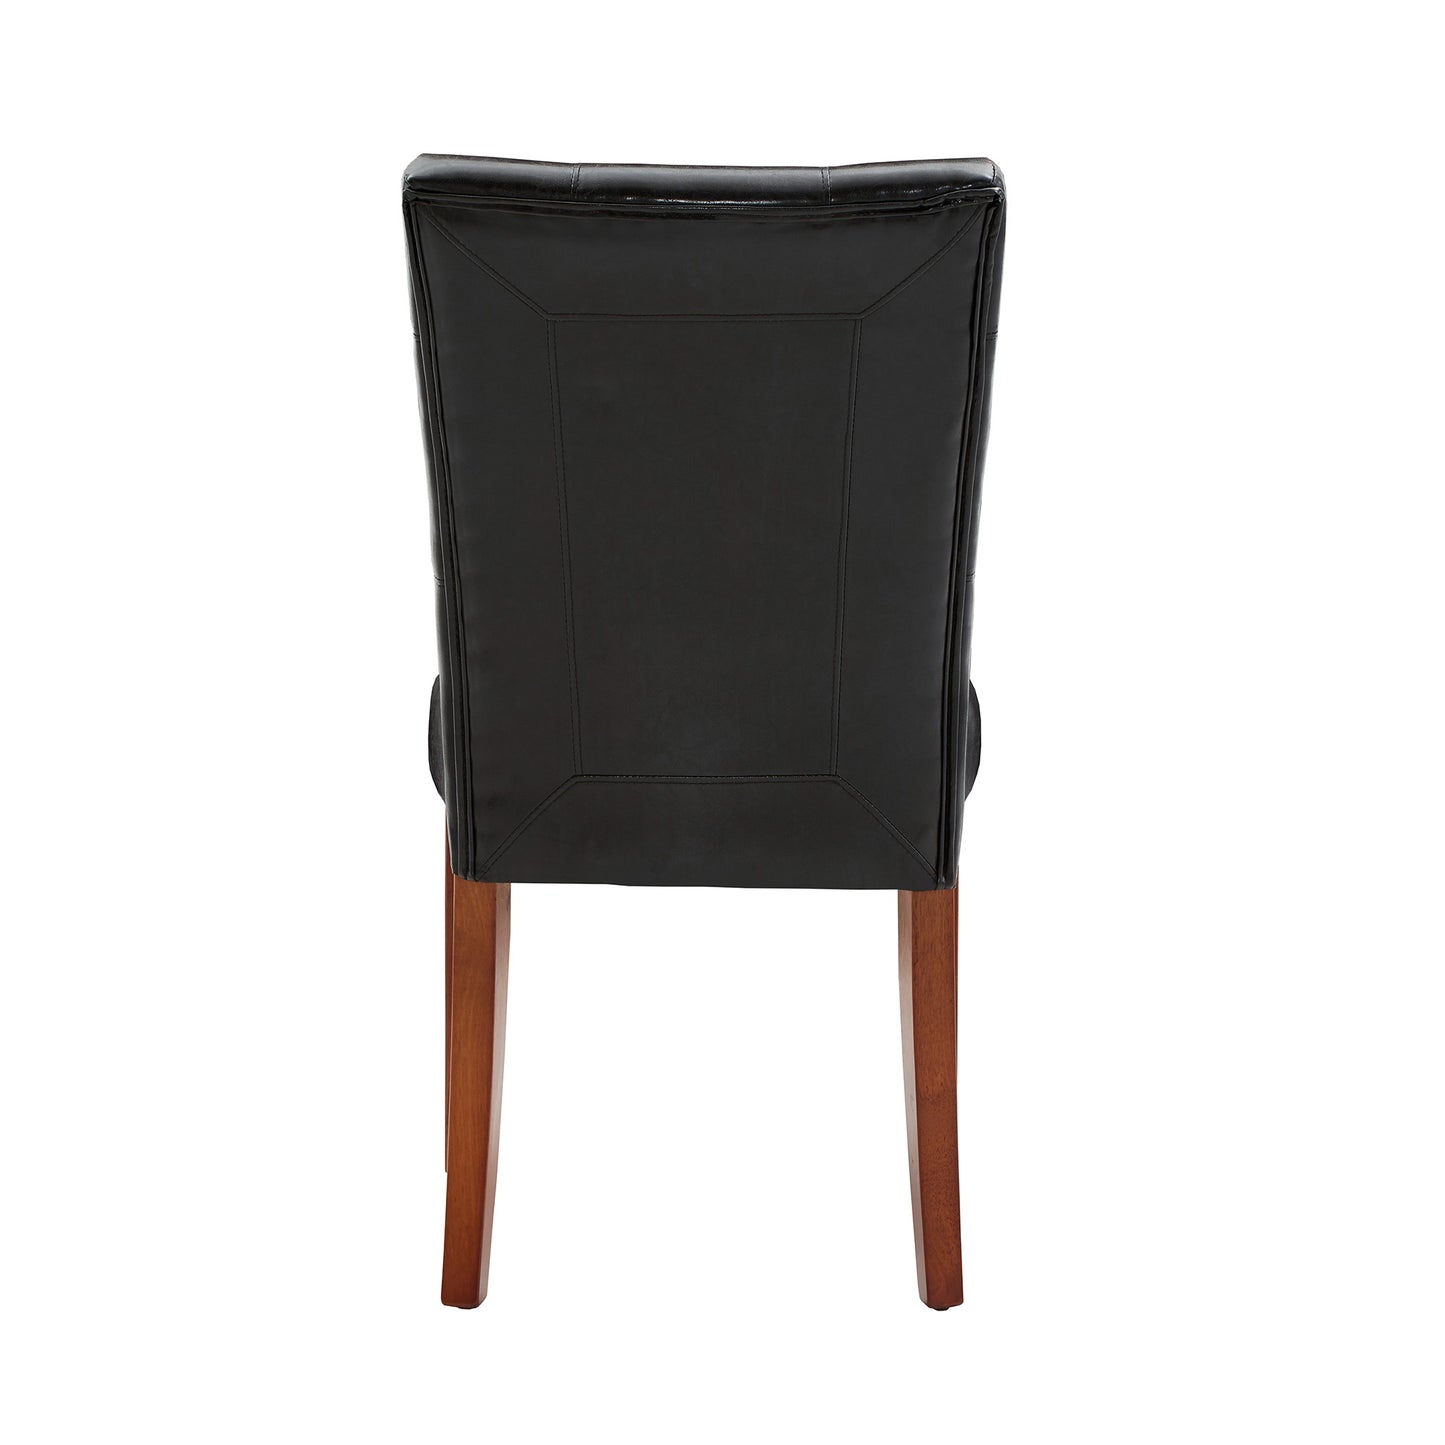 Tufted Faux Leather Dining Chairs (Set of 2) - Cherry Finish, Dark Brown Faux Leather